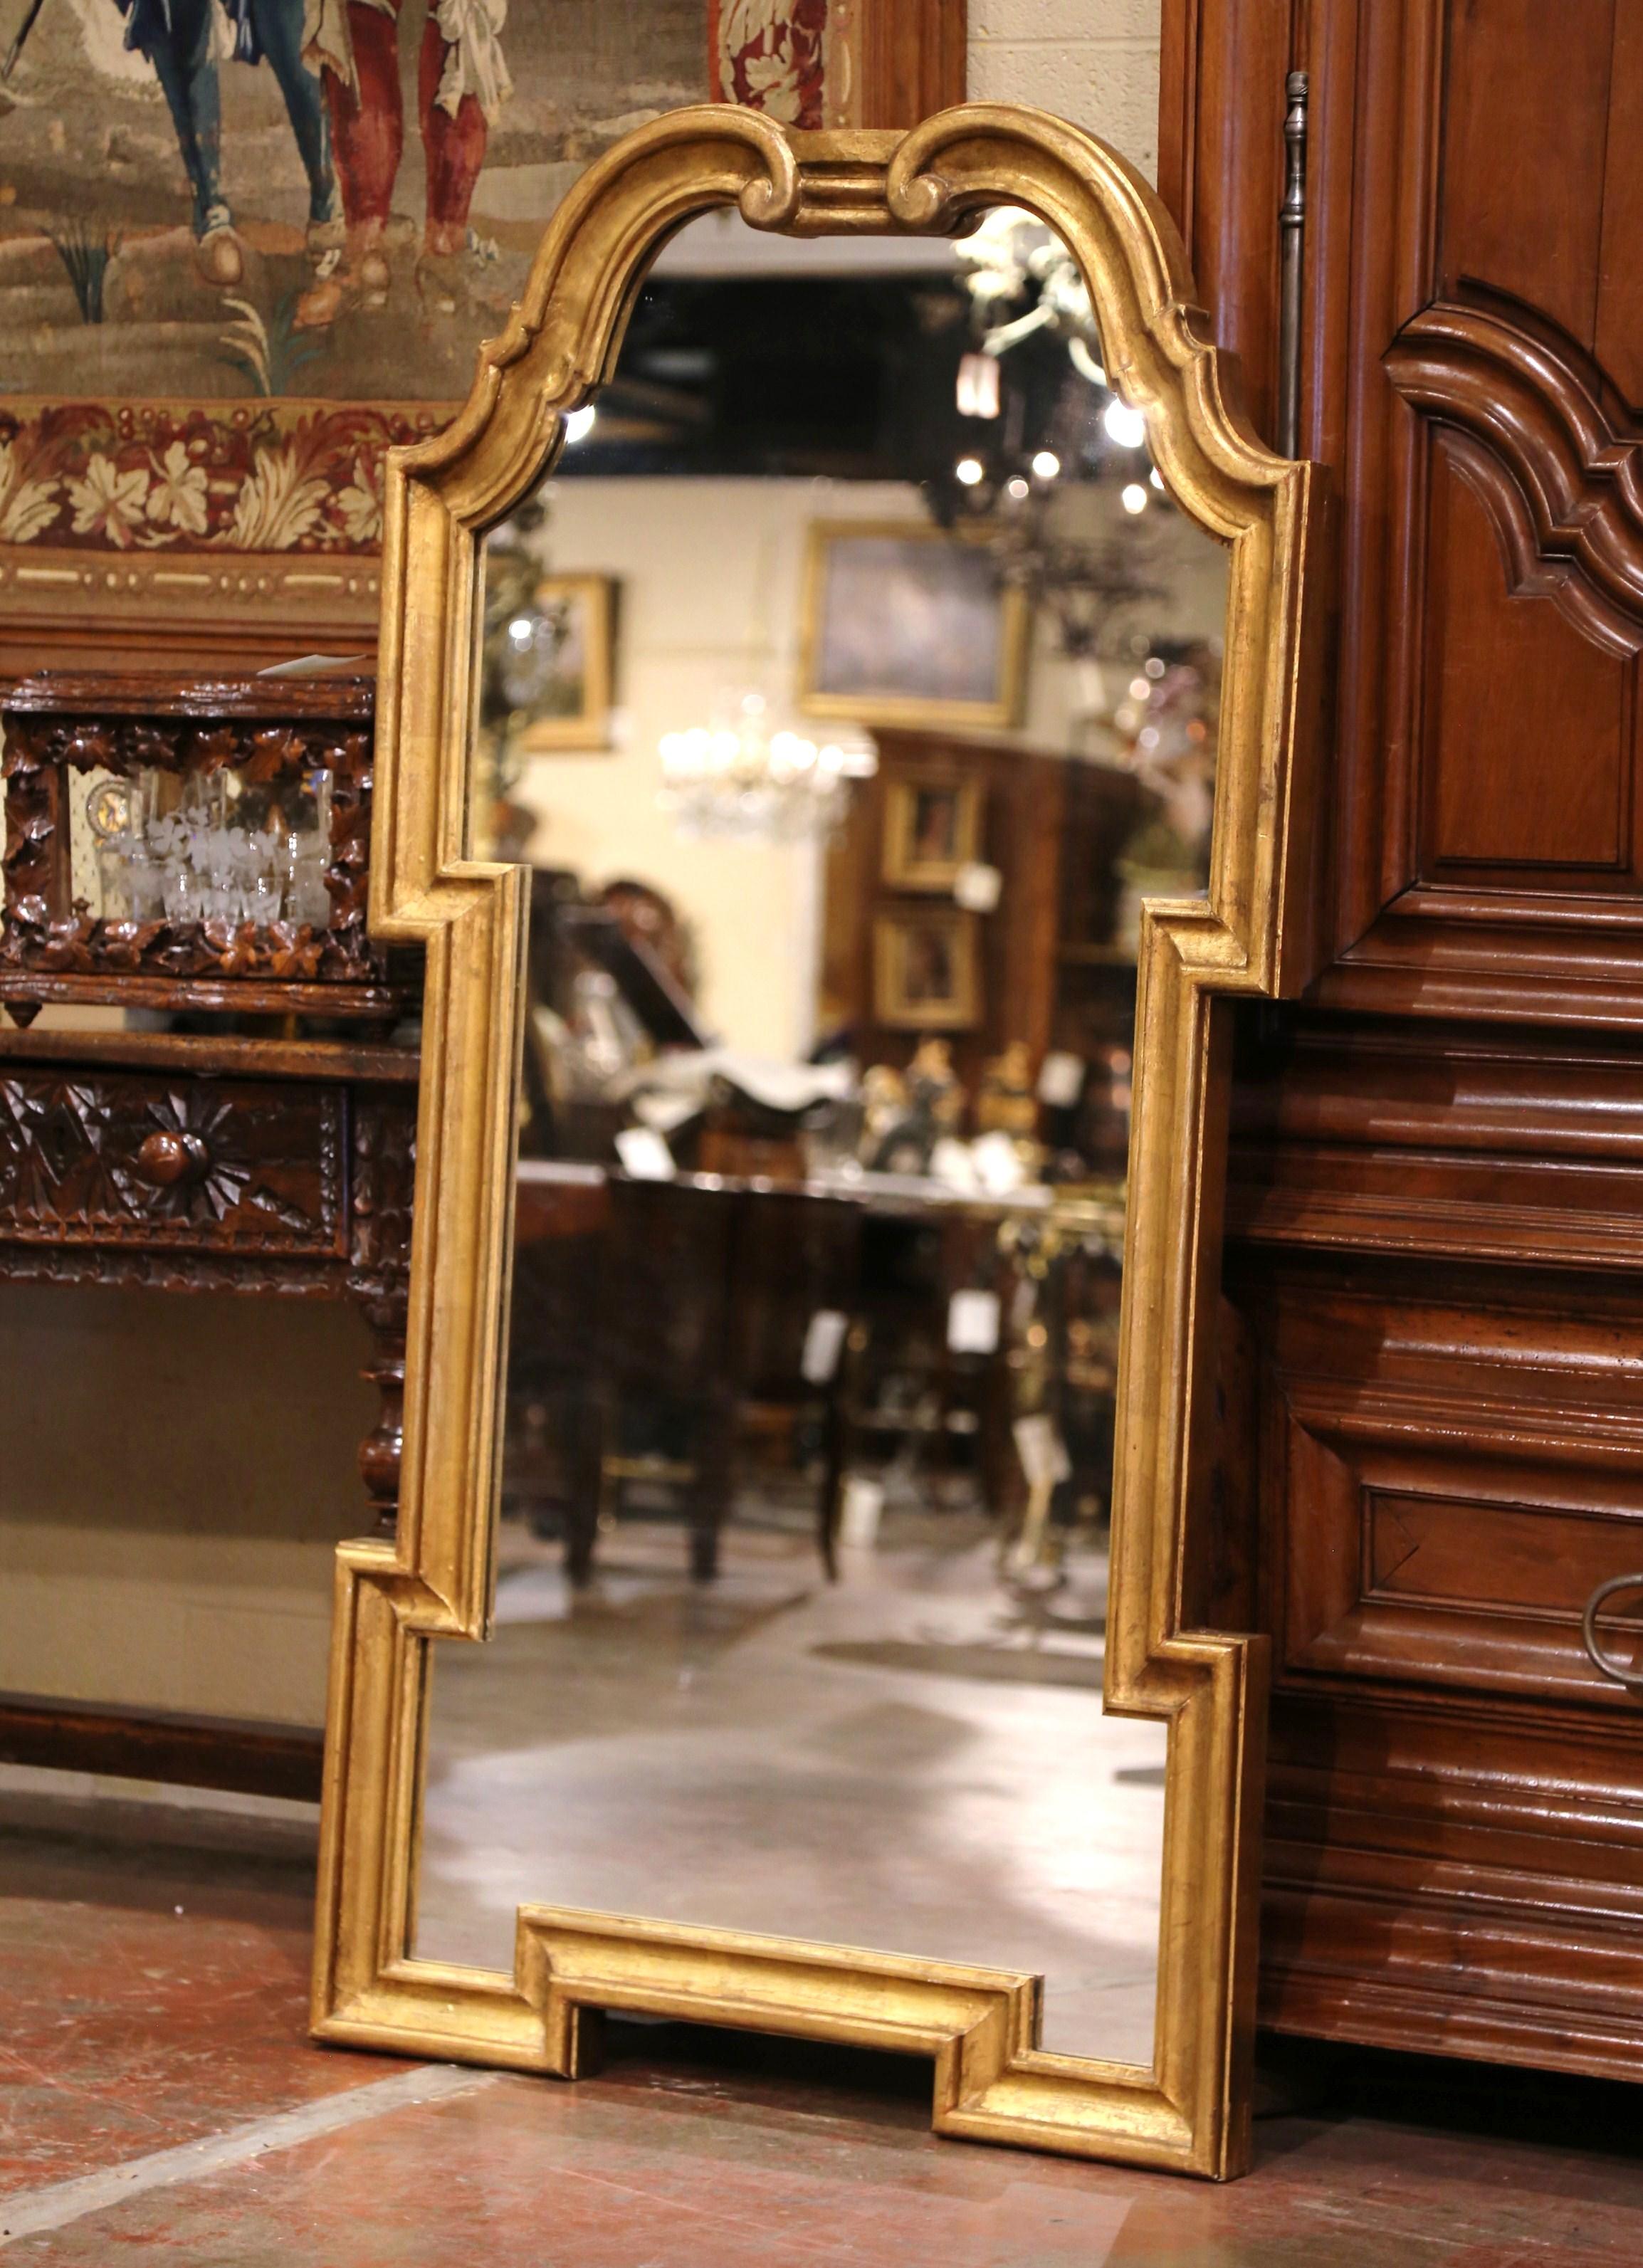 Dress a mantel with this elegant antique gilt wall mirror. Hand carved in Italy circa 1950, and almost 5 feet tall, the rectangular mirror features a double arched top over sides and bottom geometric motifs. The mirror is dressed with the original